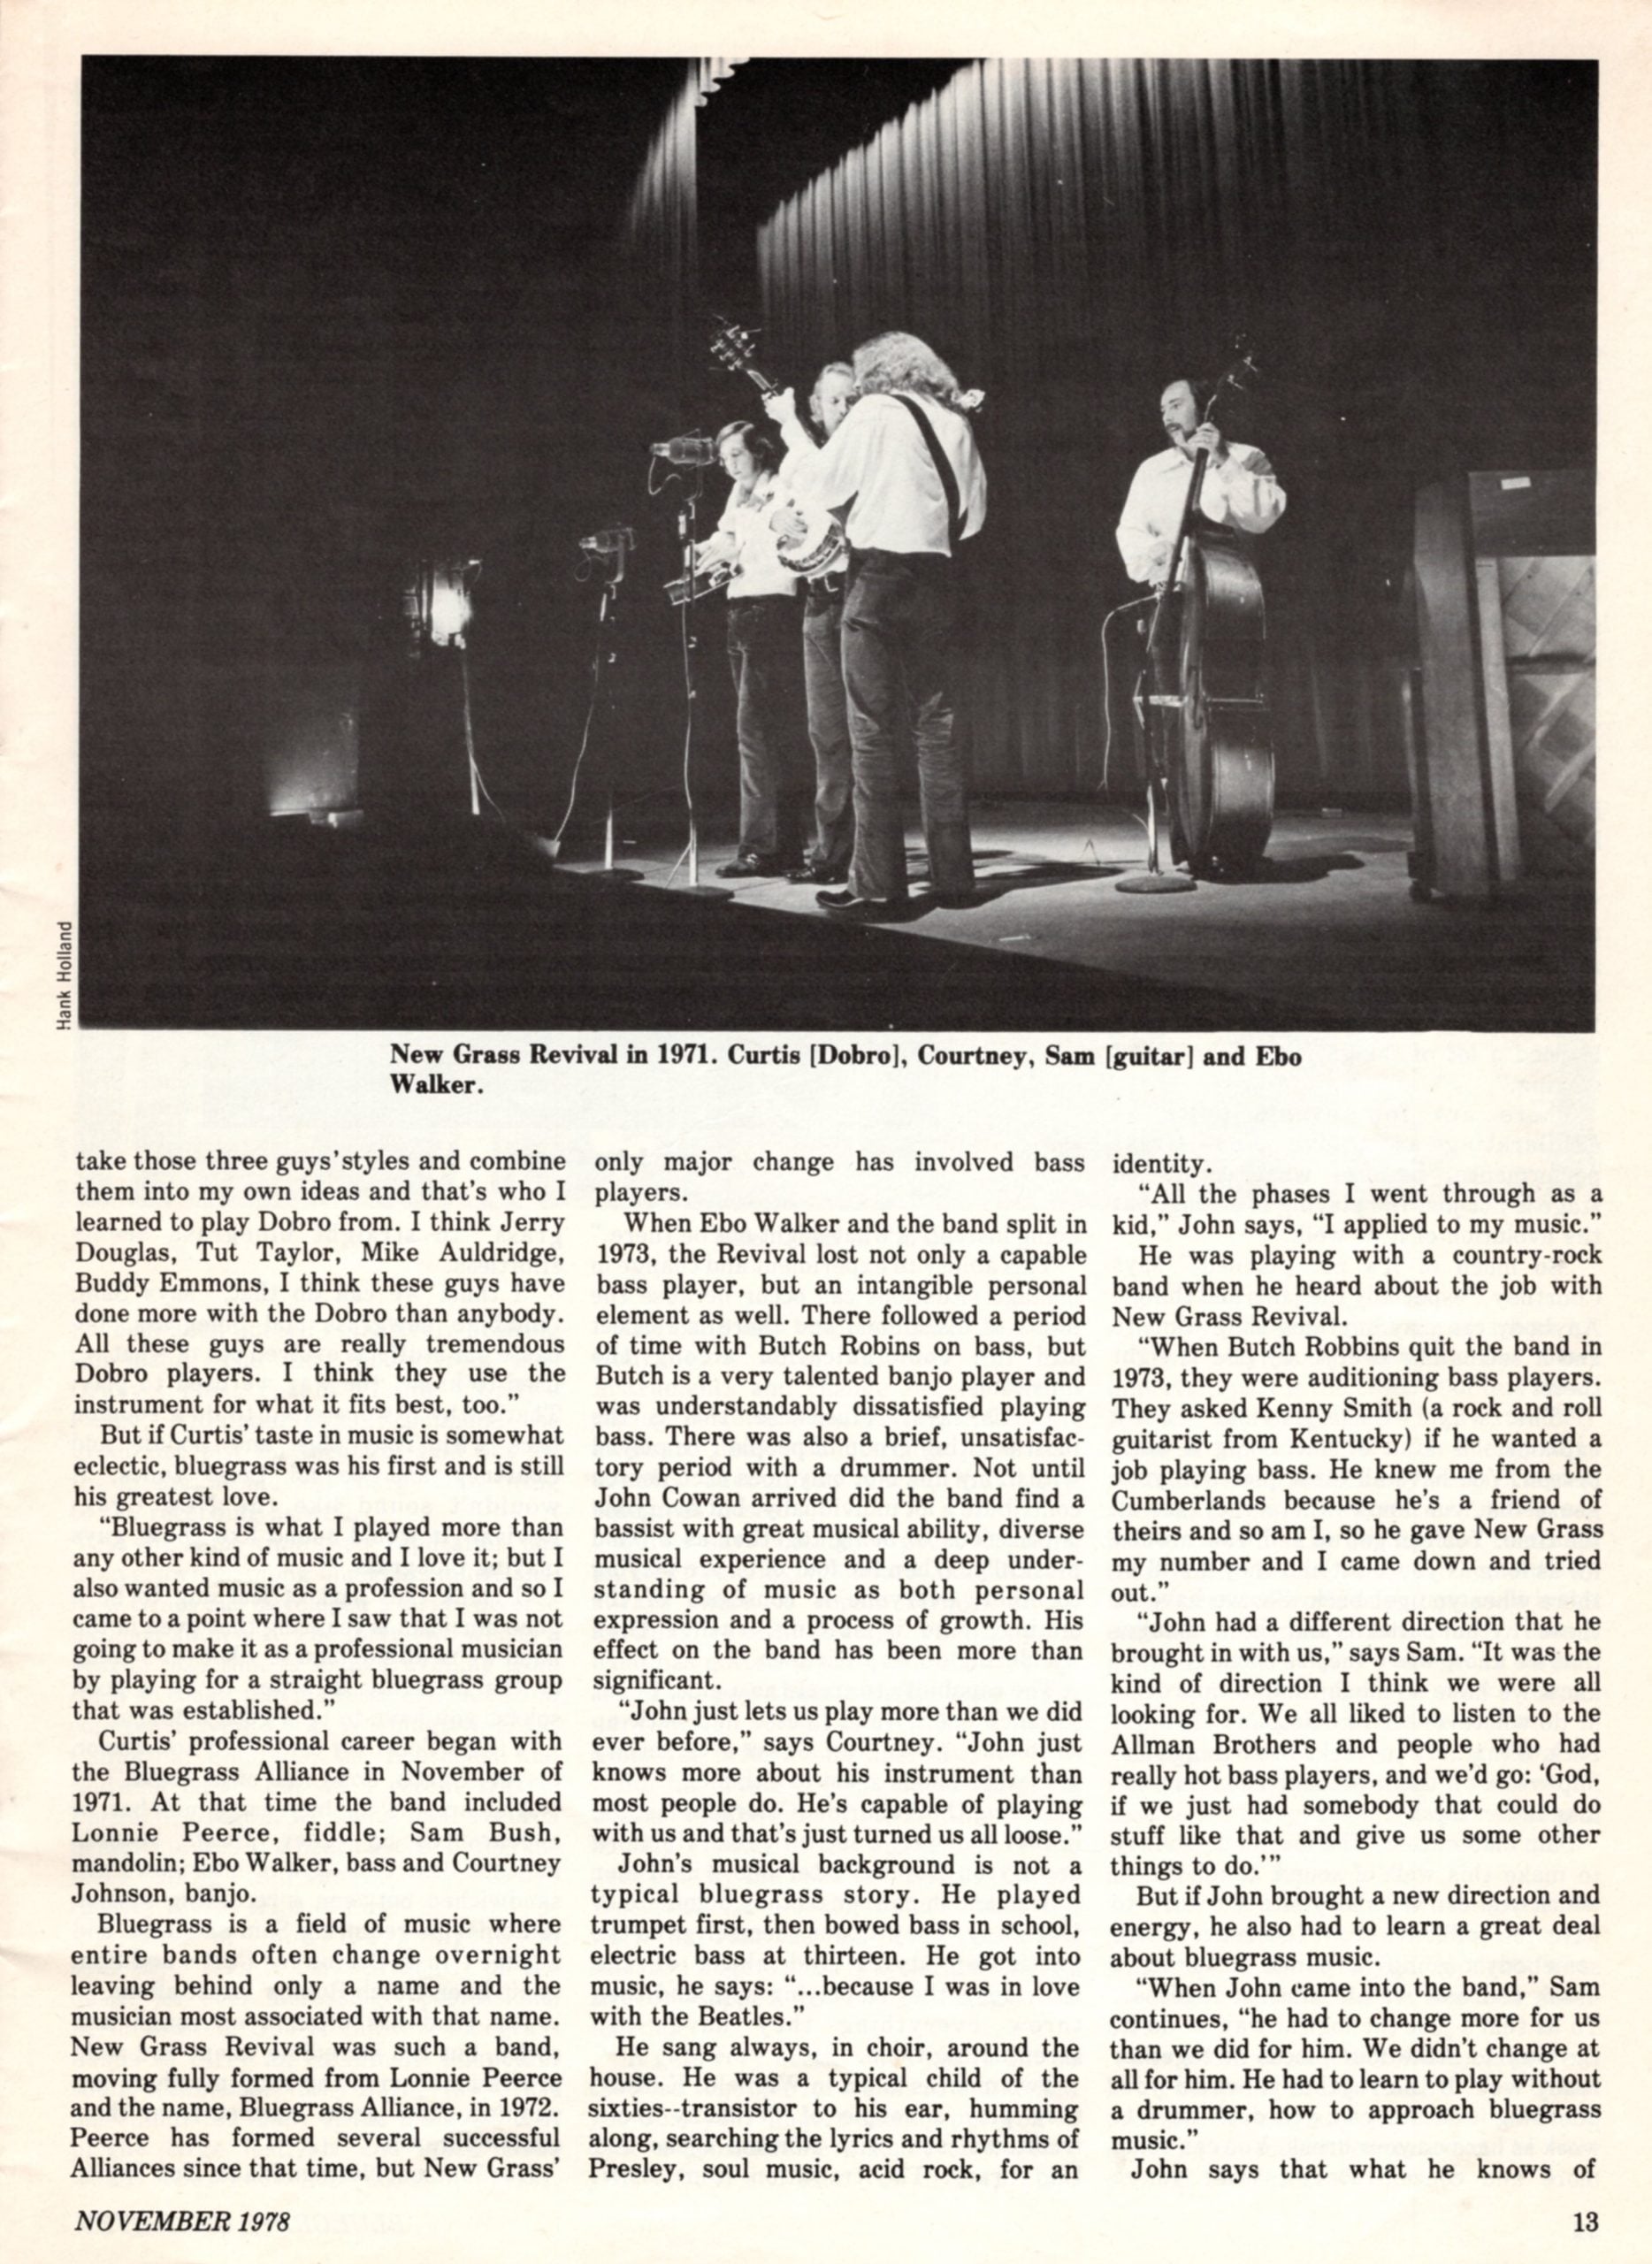 Clipping from an original Bluegrass Unlimited magazine